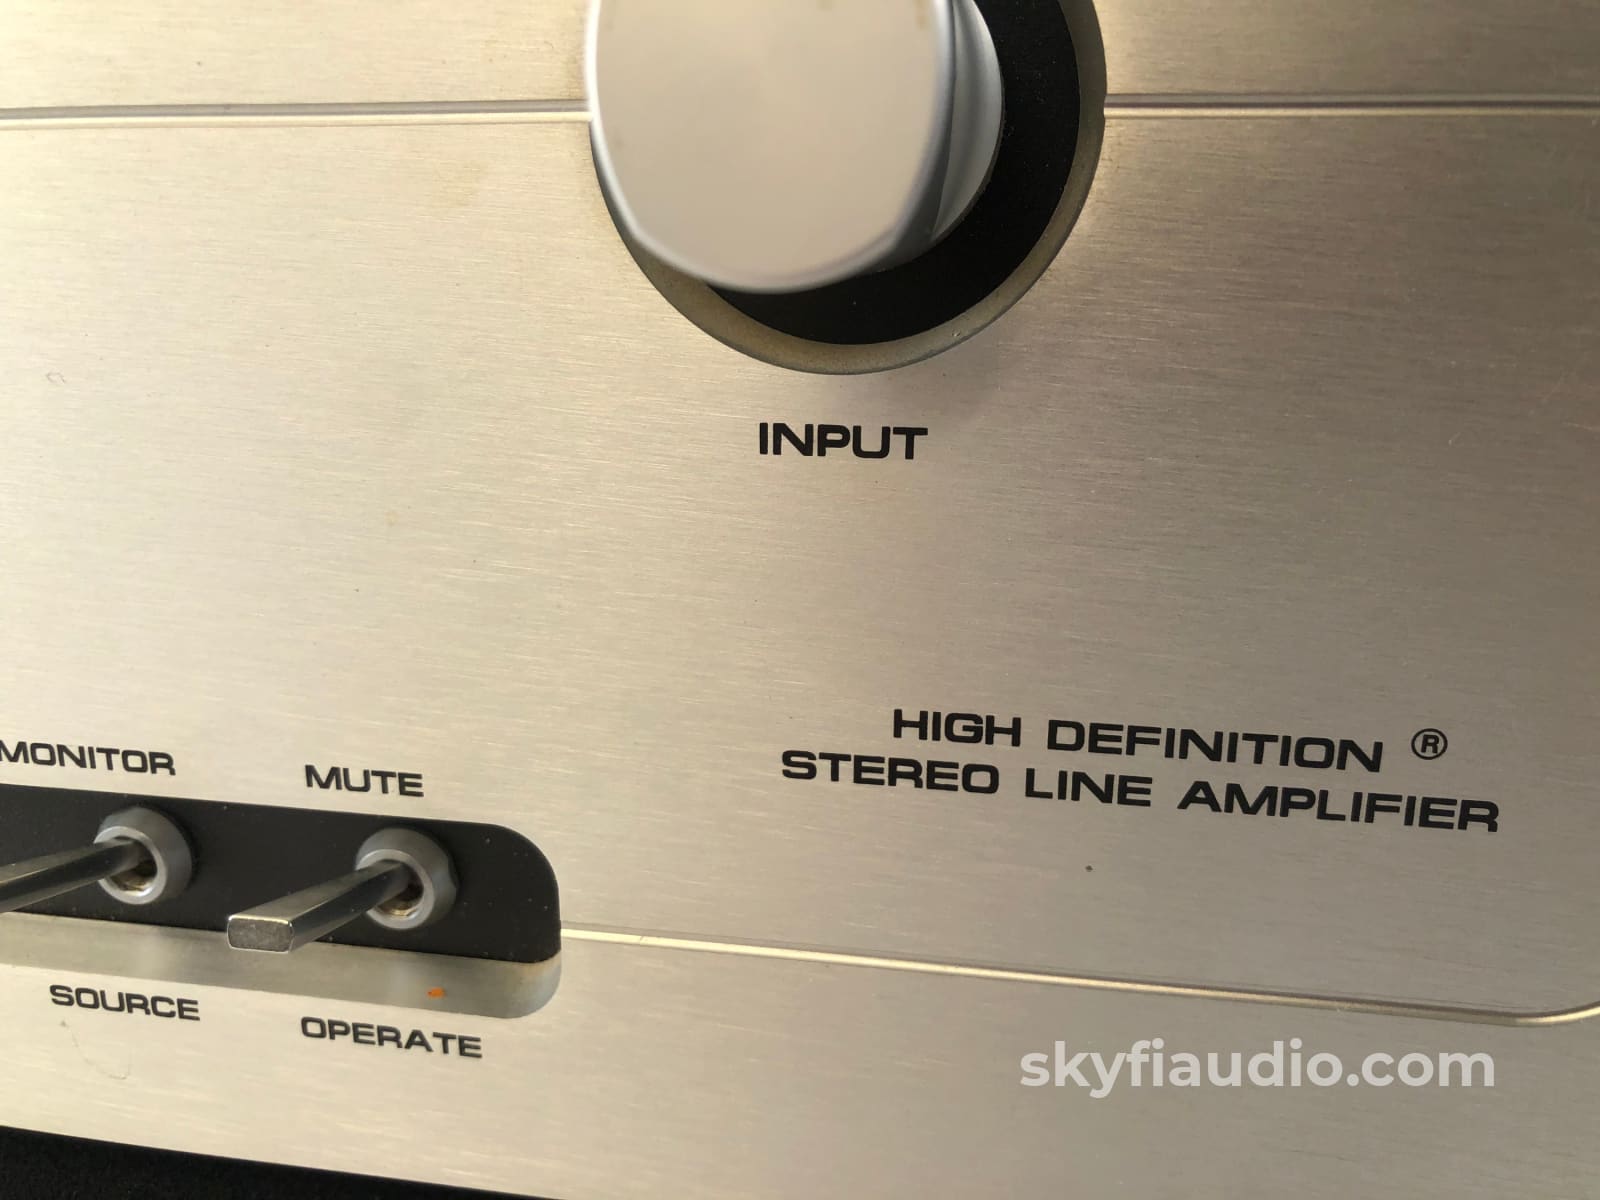 Audio Research Ls22 - All Tube Preamplifier